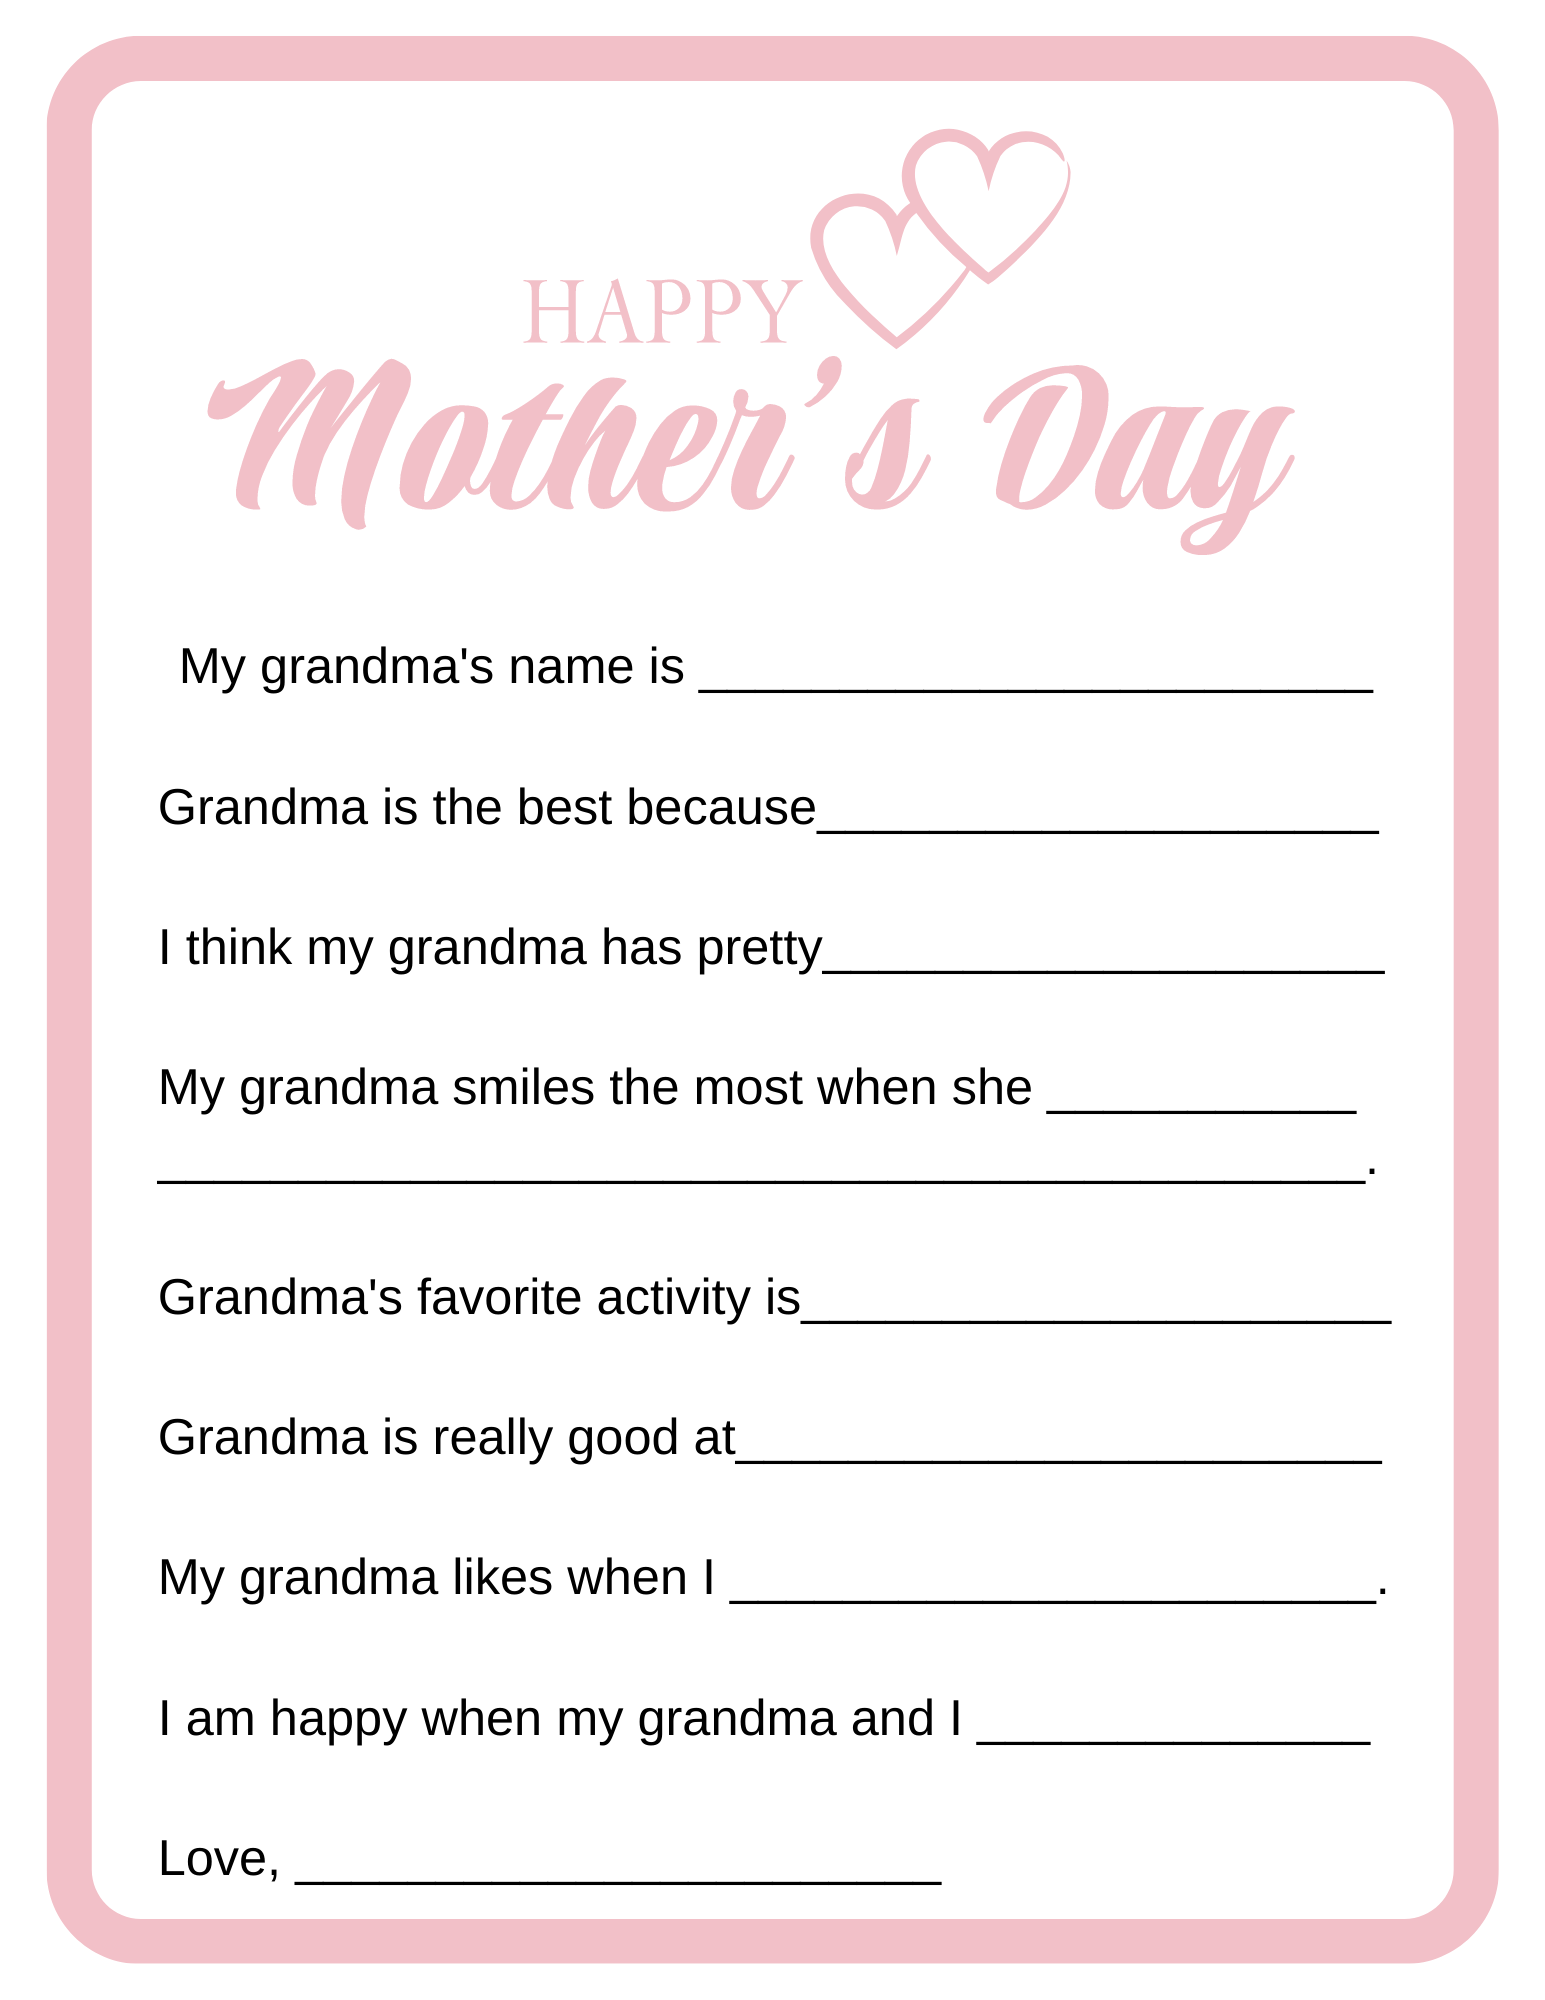 6 Free Questionnaires For Grandma Mother s Day Printables Xoxoerinsmith